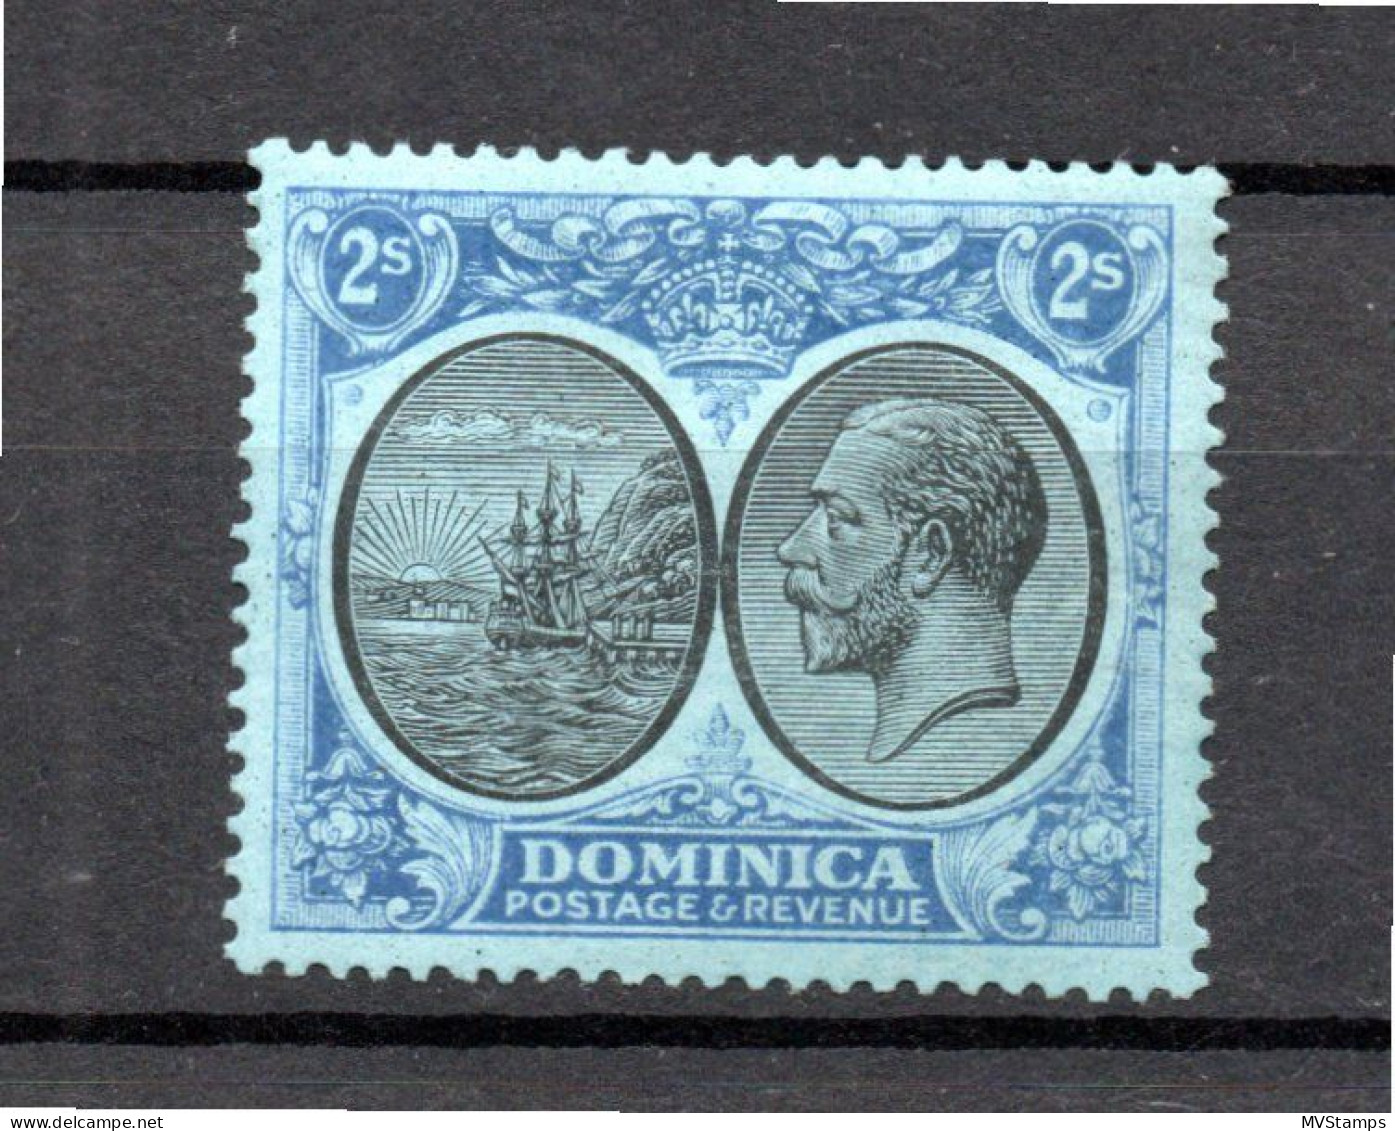 Dominica 1923 Old 2 Shilling King George V Stamp (Michel 81) Nice MNH - Dominique (...-1978)